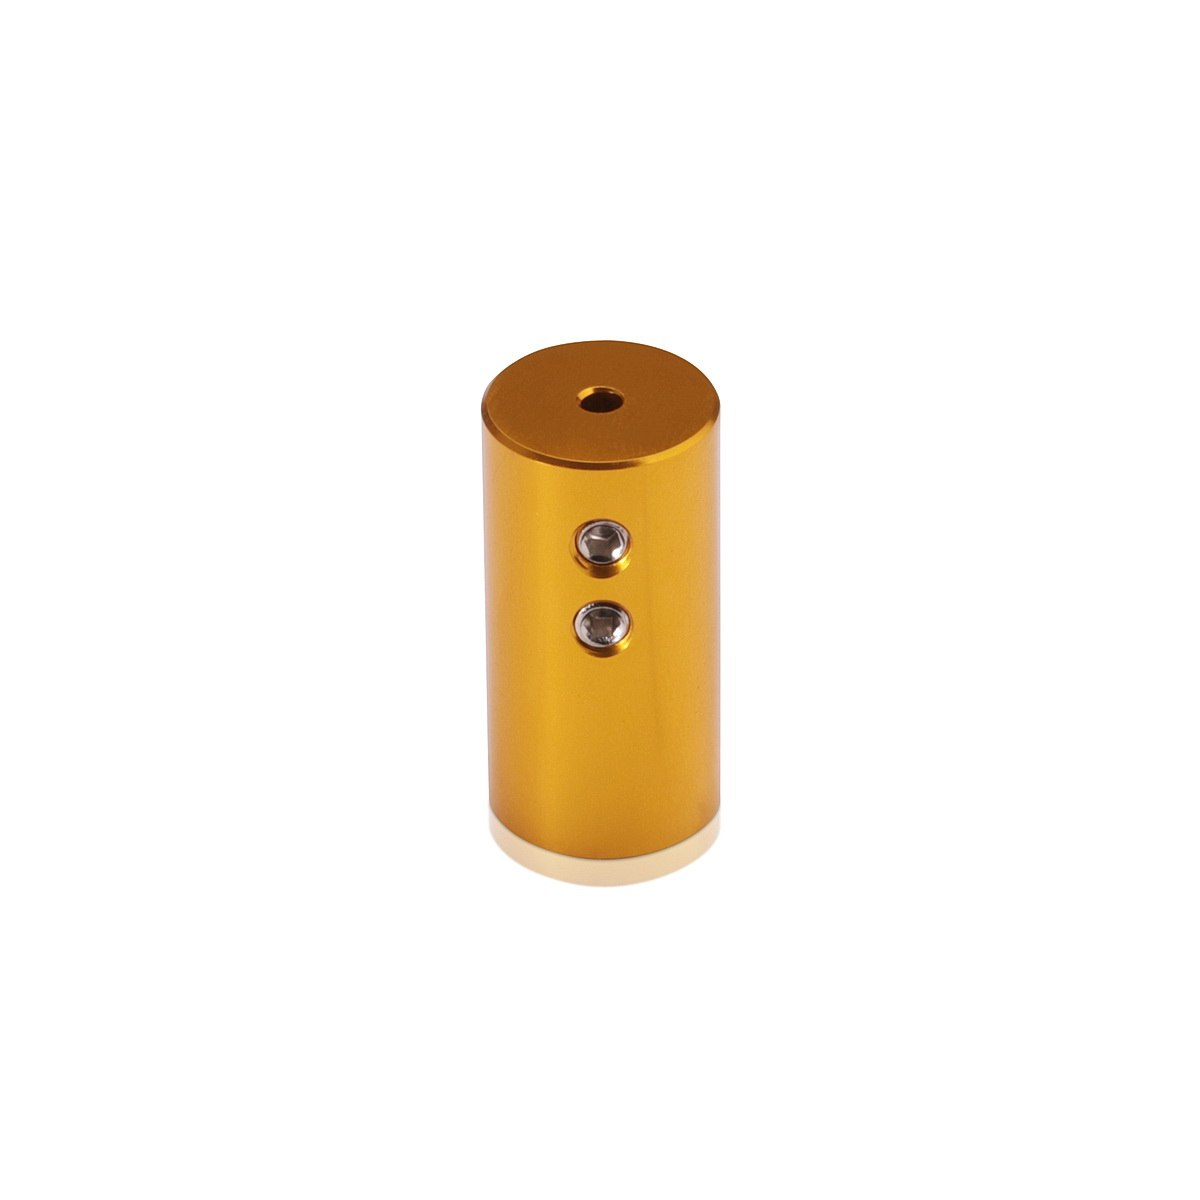 Aluminum Ceiling Mounted Material Holder, Gold Anodized Finish